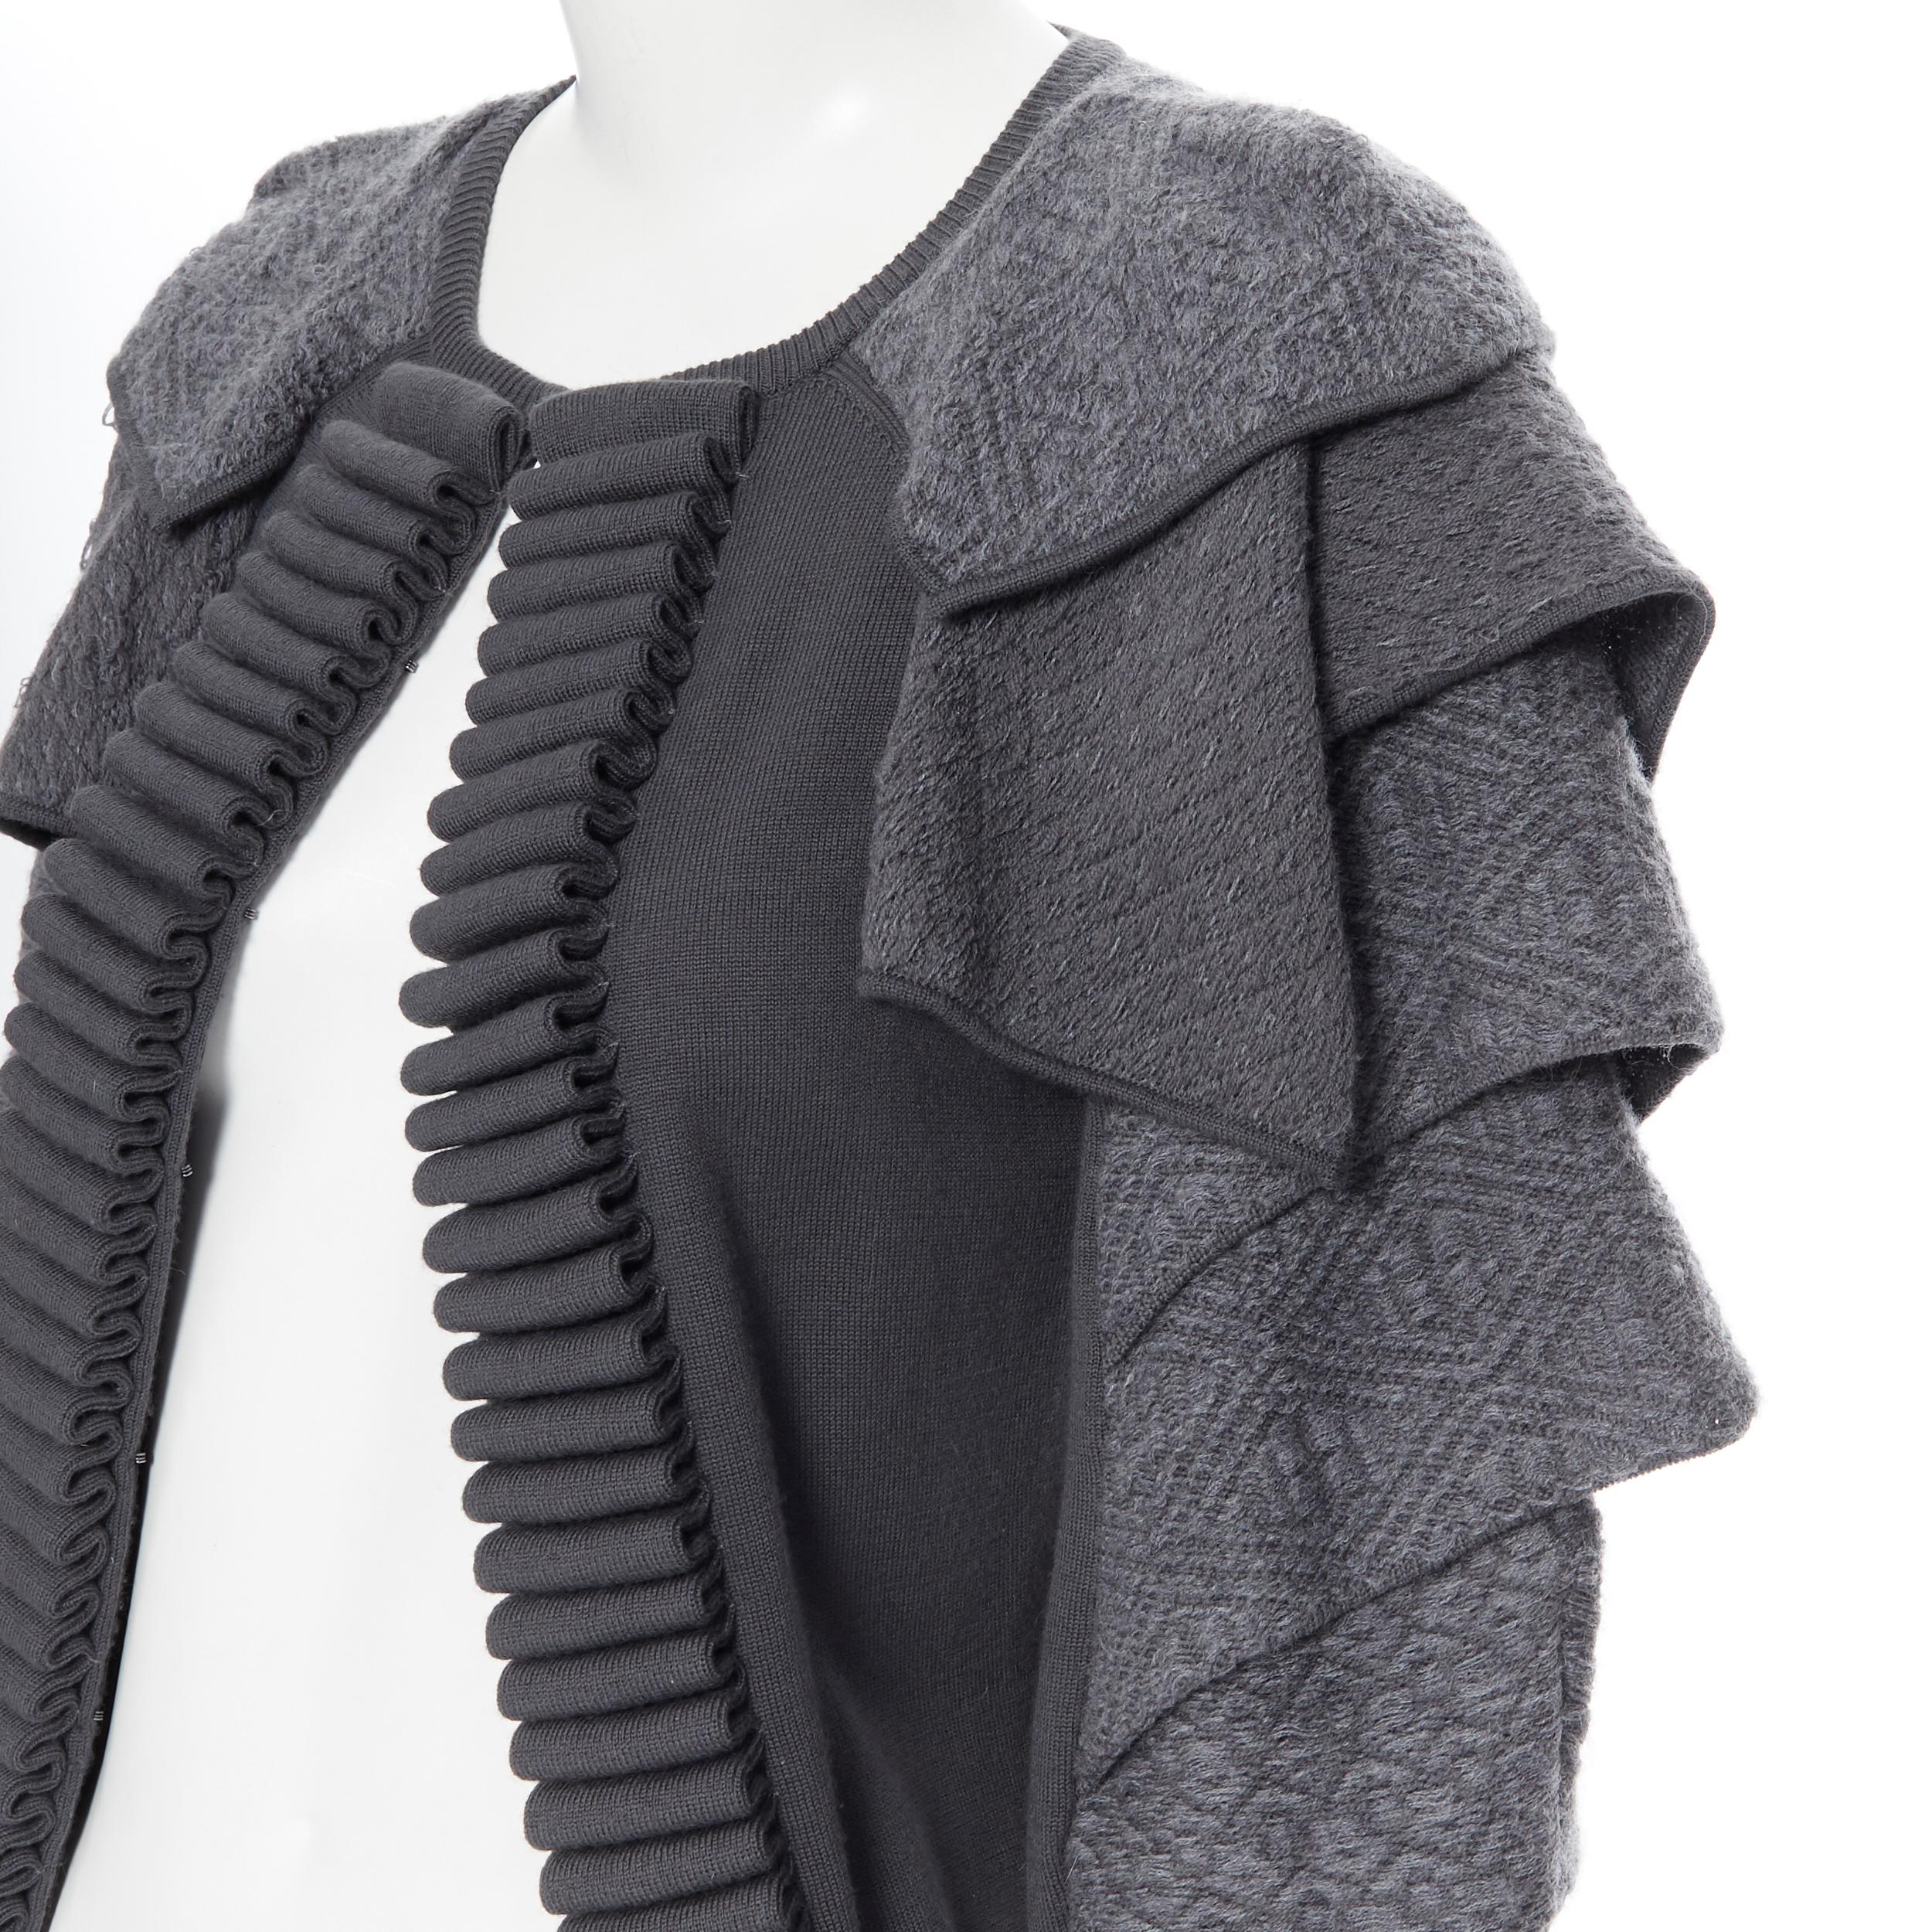 TOGA ARCHIVES grey wool knitted armour petal sleeves ribbed cardigan sweater JP1
Brand: Toga Archives
Designer: Toga Archives
Model Name / Style: Armor cardigan
Material: Wool
Color: Grey
Pattern: Solid
Closure: Hook & eye
Extra Detail: Ribbed